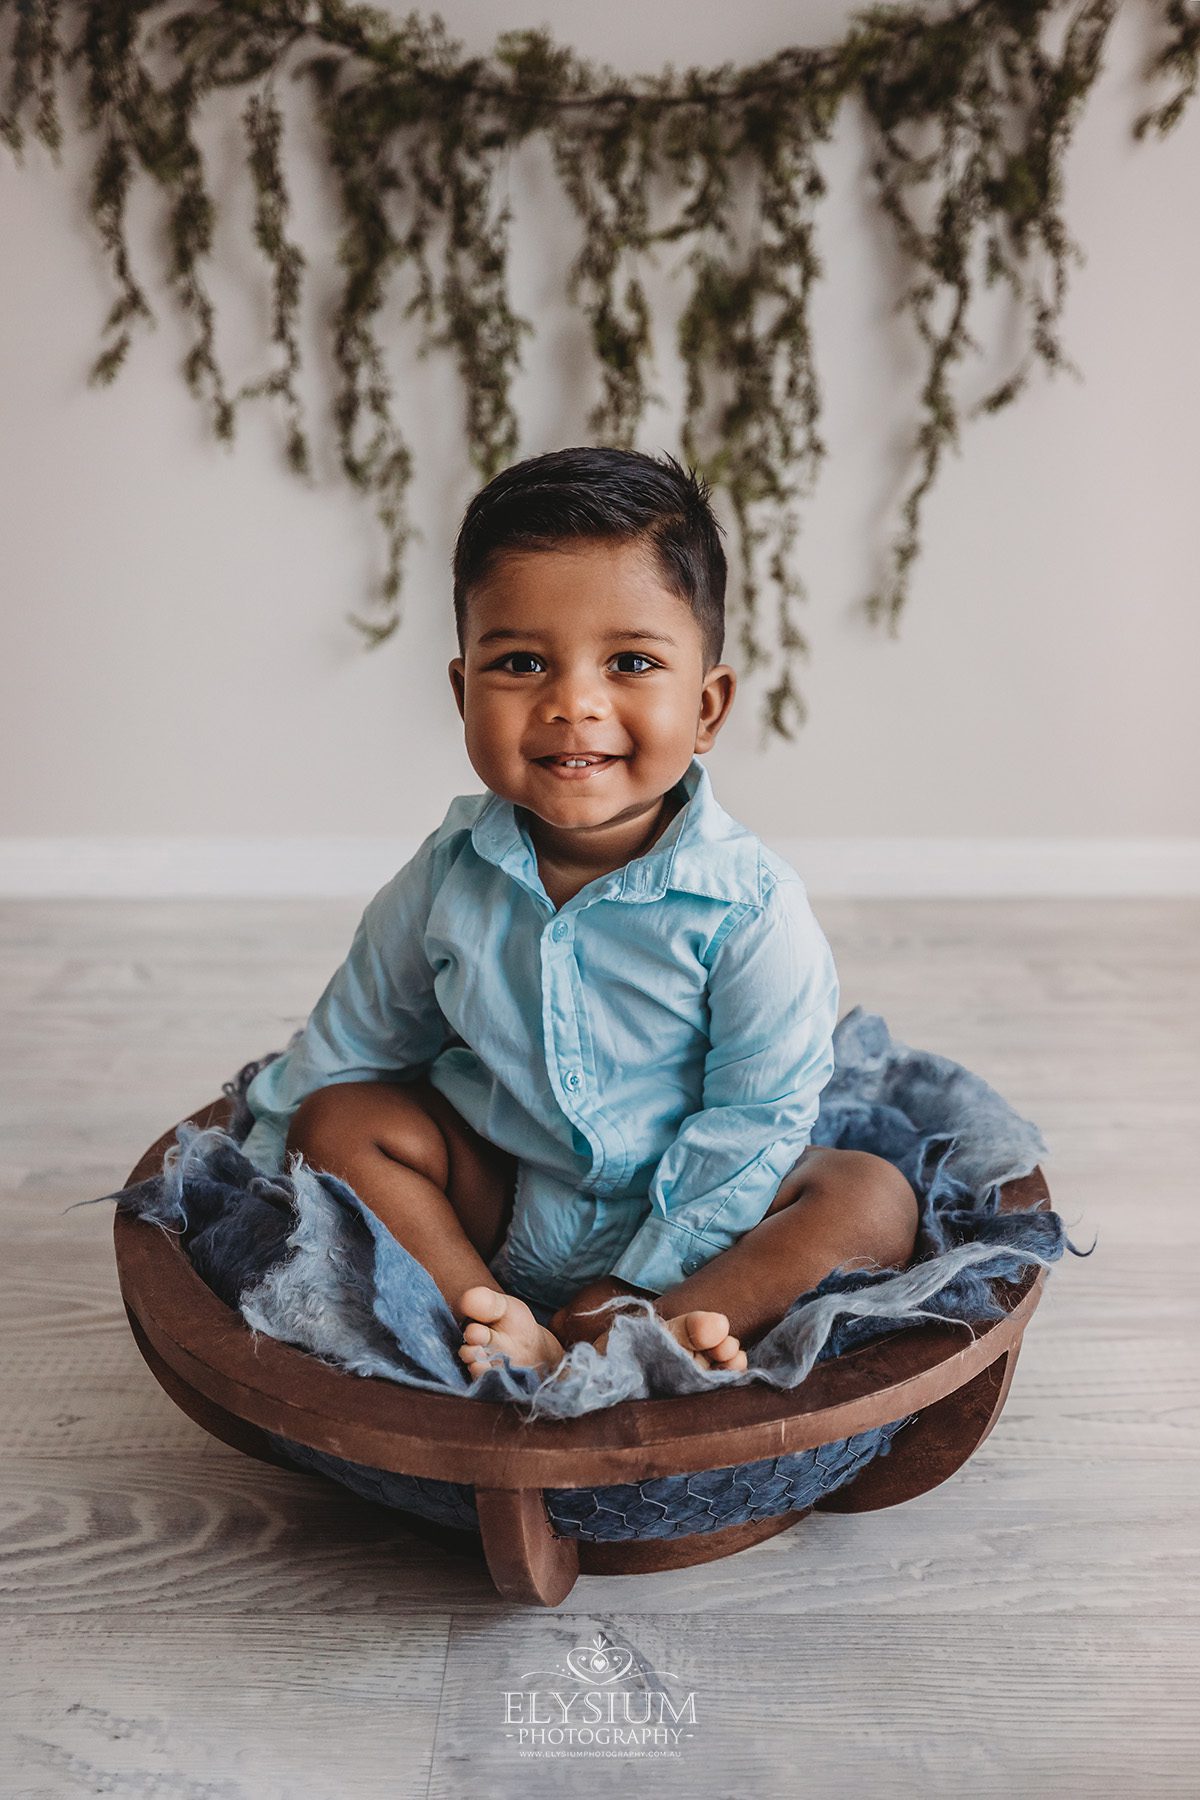 A smiley baby boy wearing blue sits in a wooden bowl